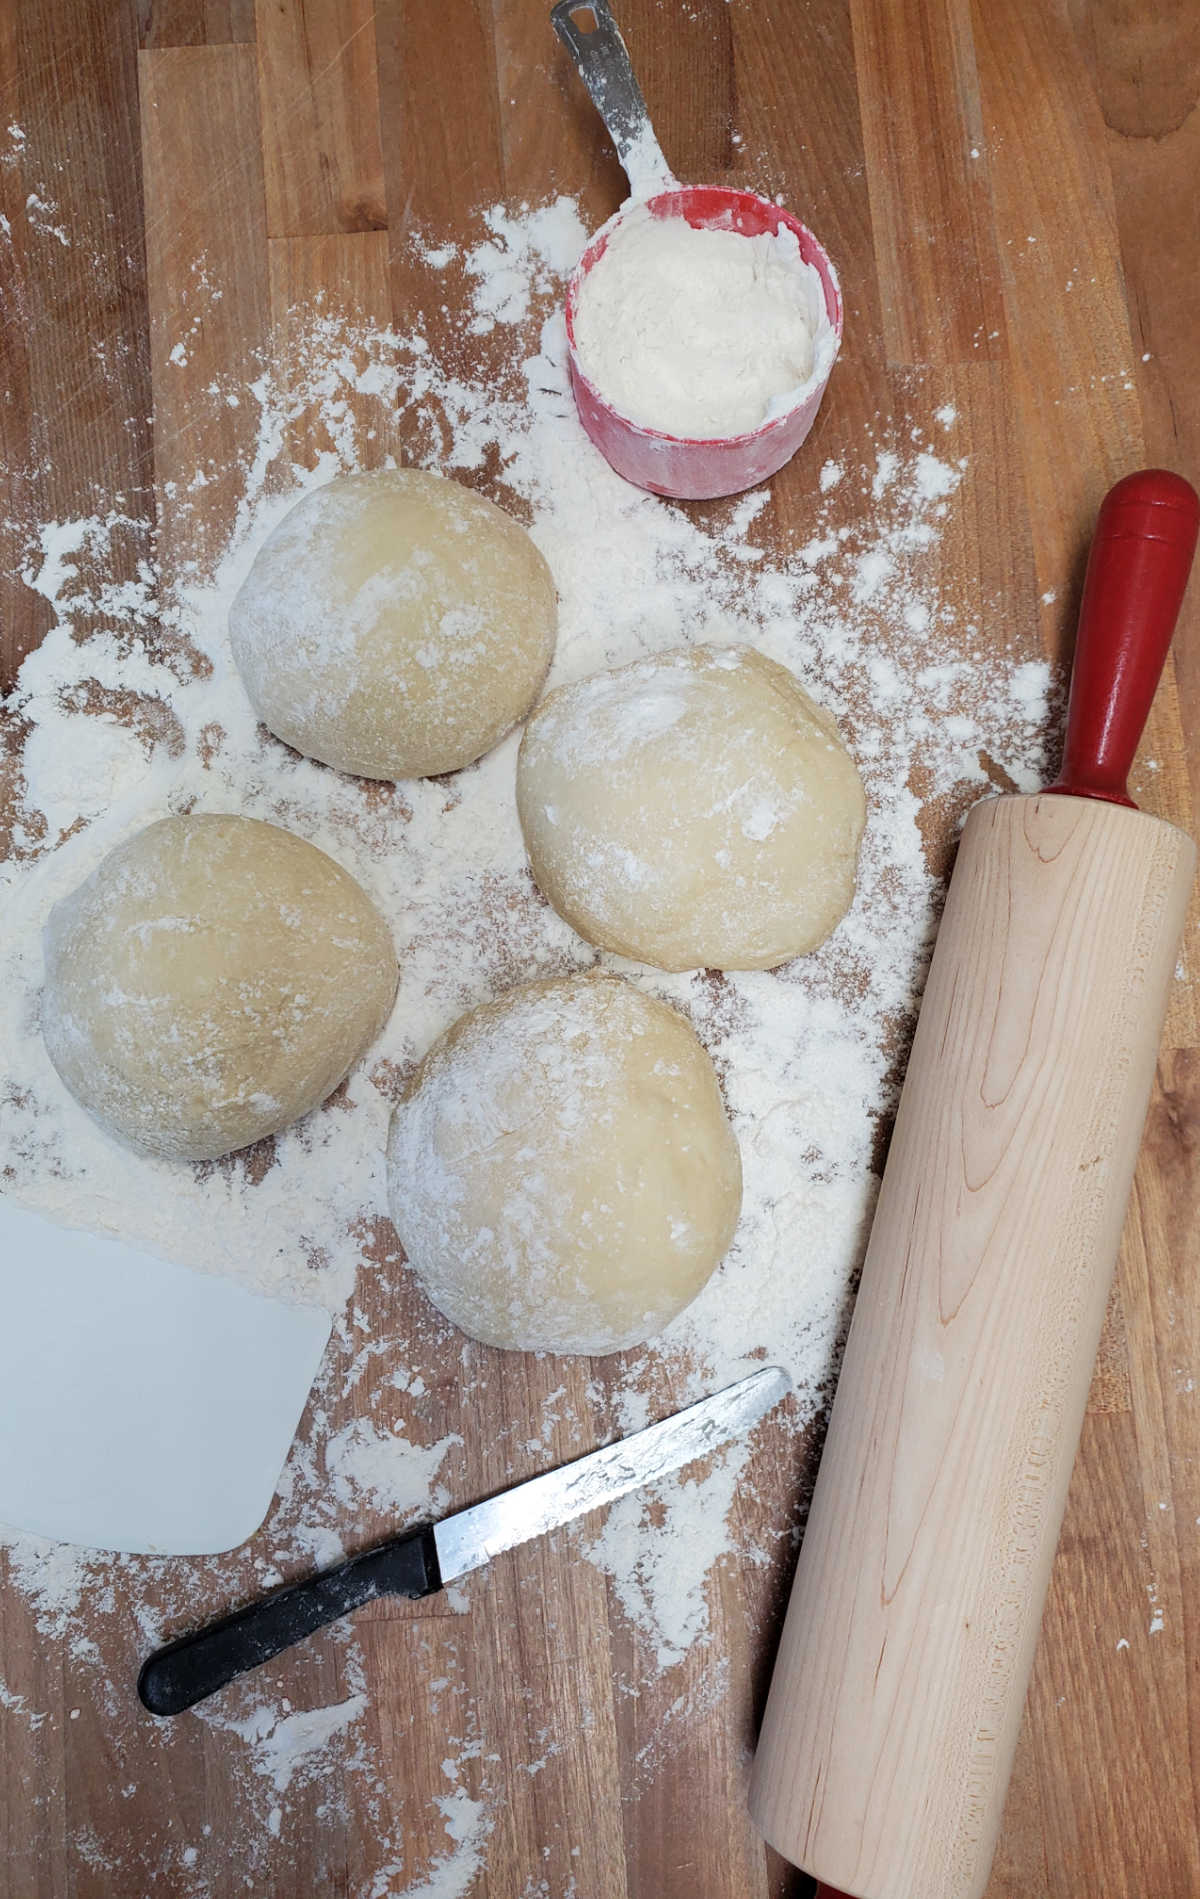 Four pieces of Pizza dough rising on butcher block, red handled rolling pin to side.